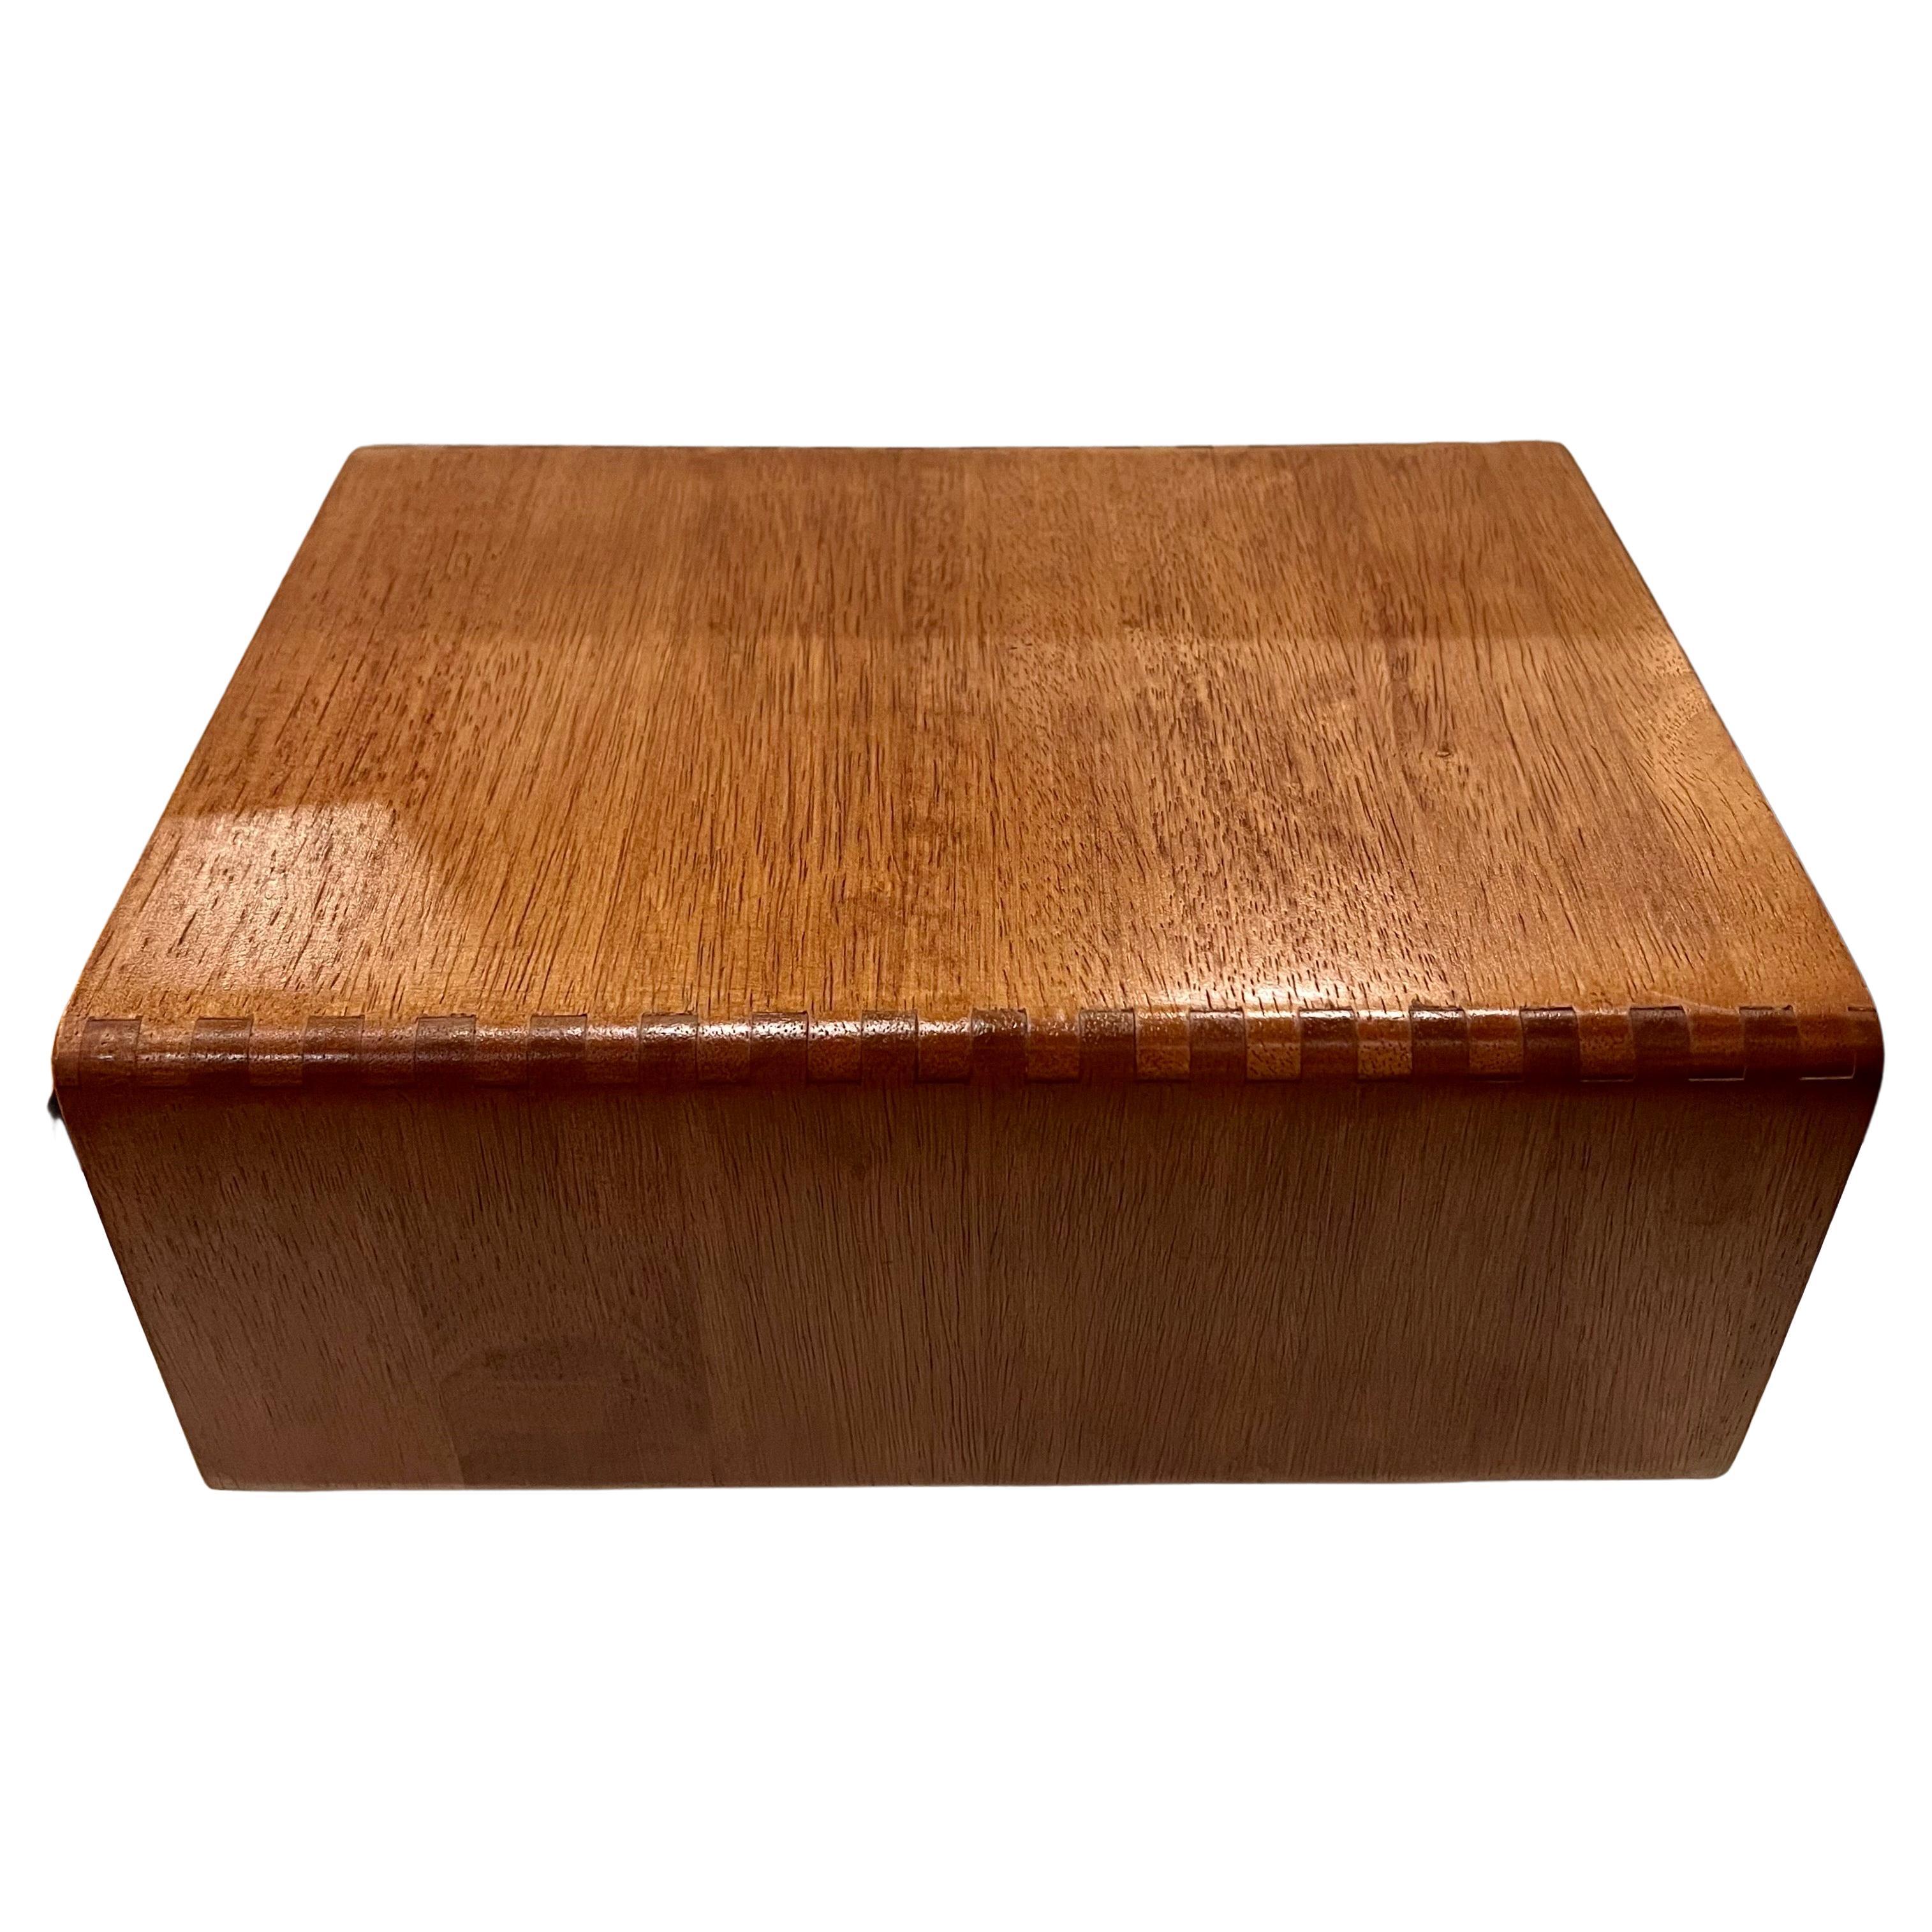 Danish Modern Solid Teak Dovetail Multiuse Box with Drawer In Excellent Condition For Sale In San Diego, CA